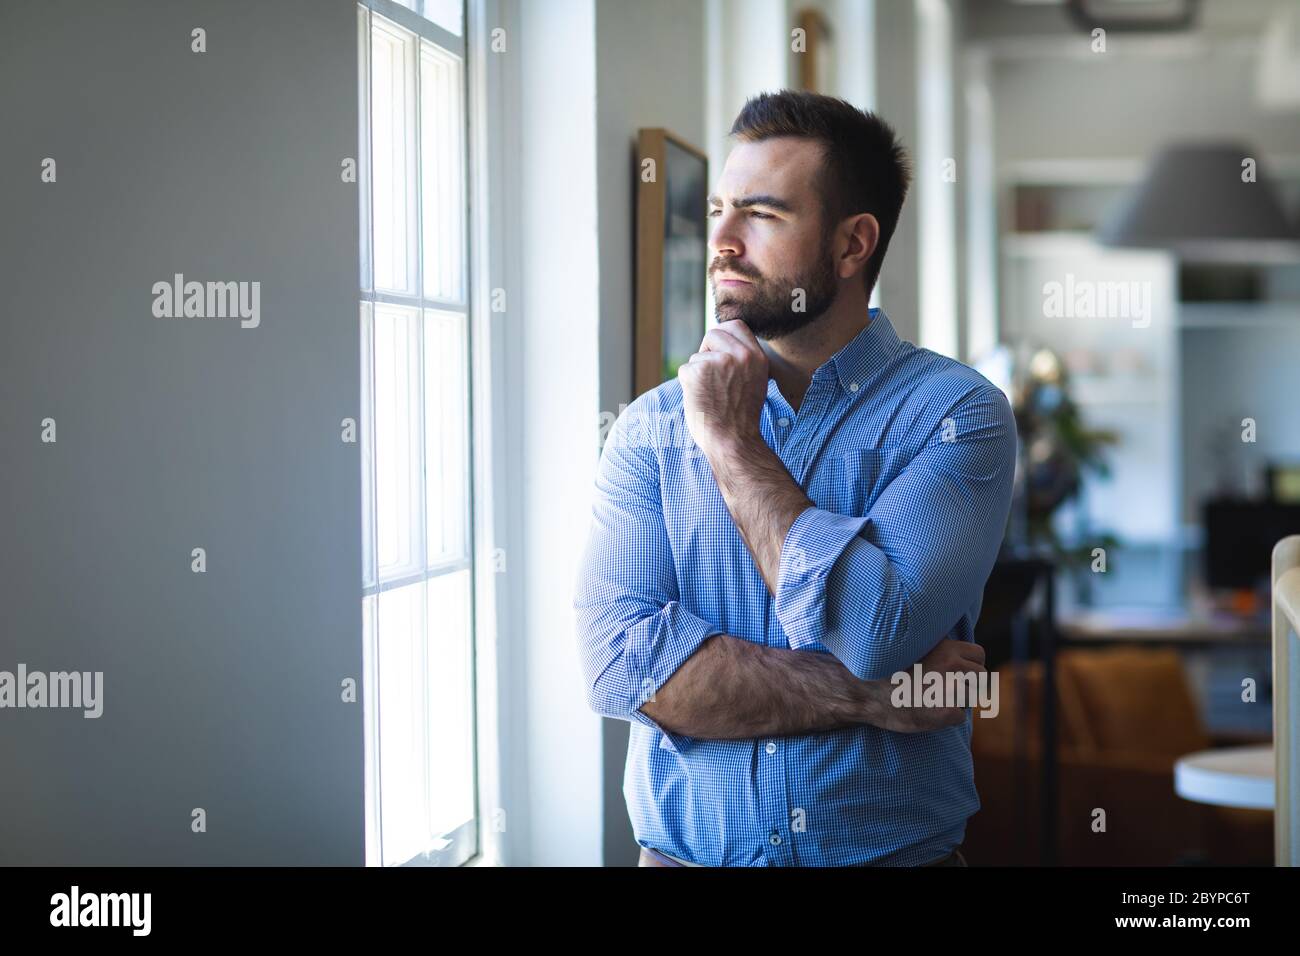 Caucasian man thinking next to a window in an office Stock Photo